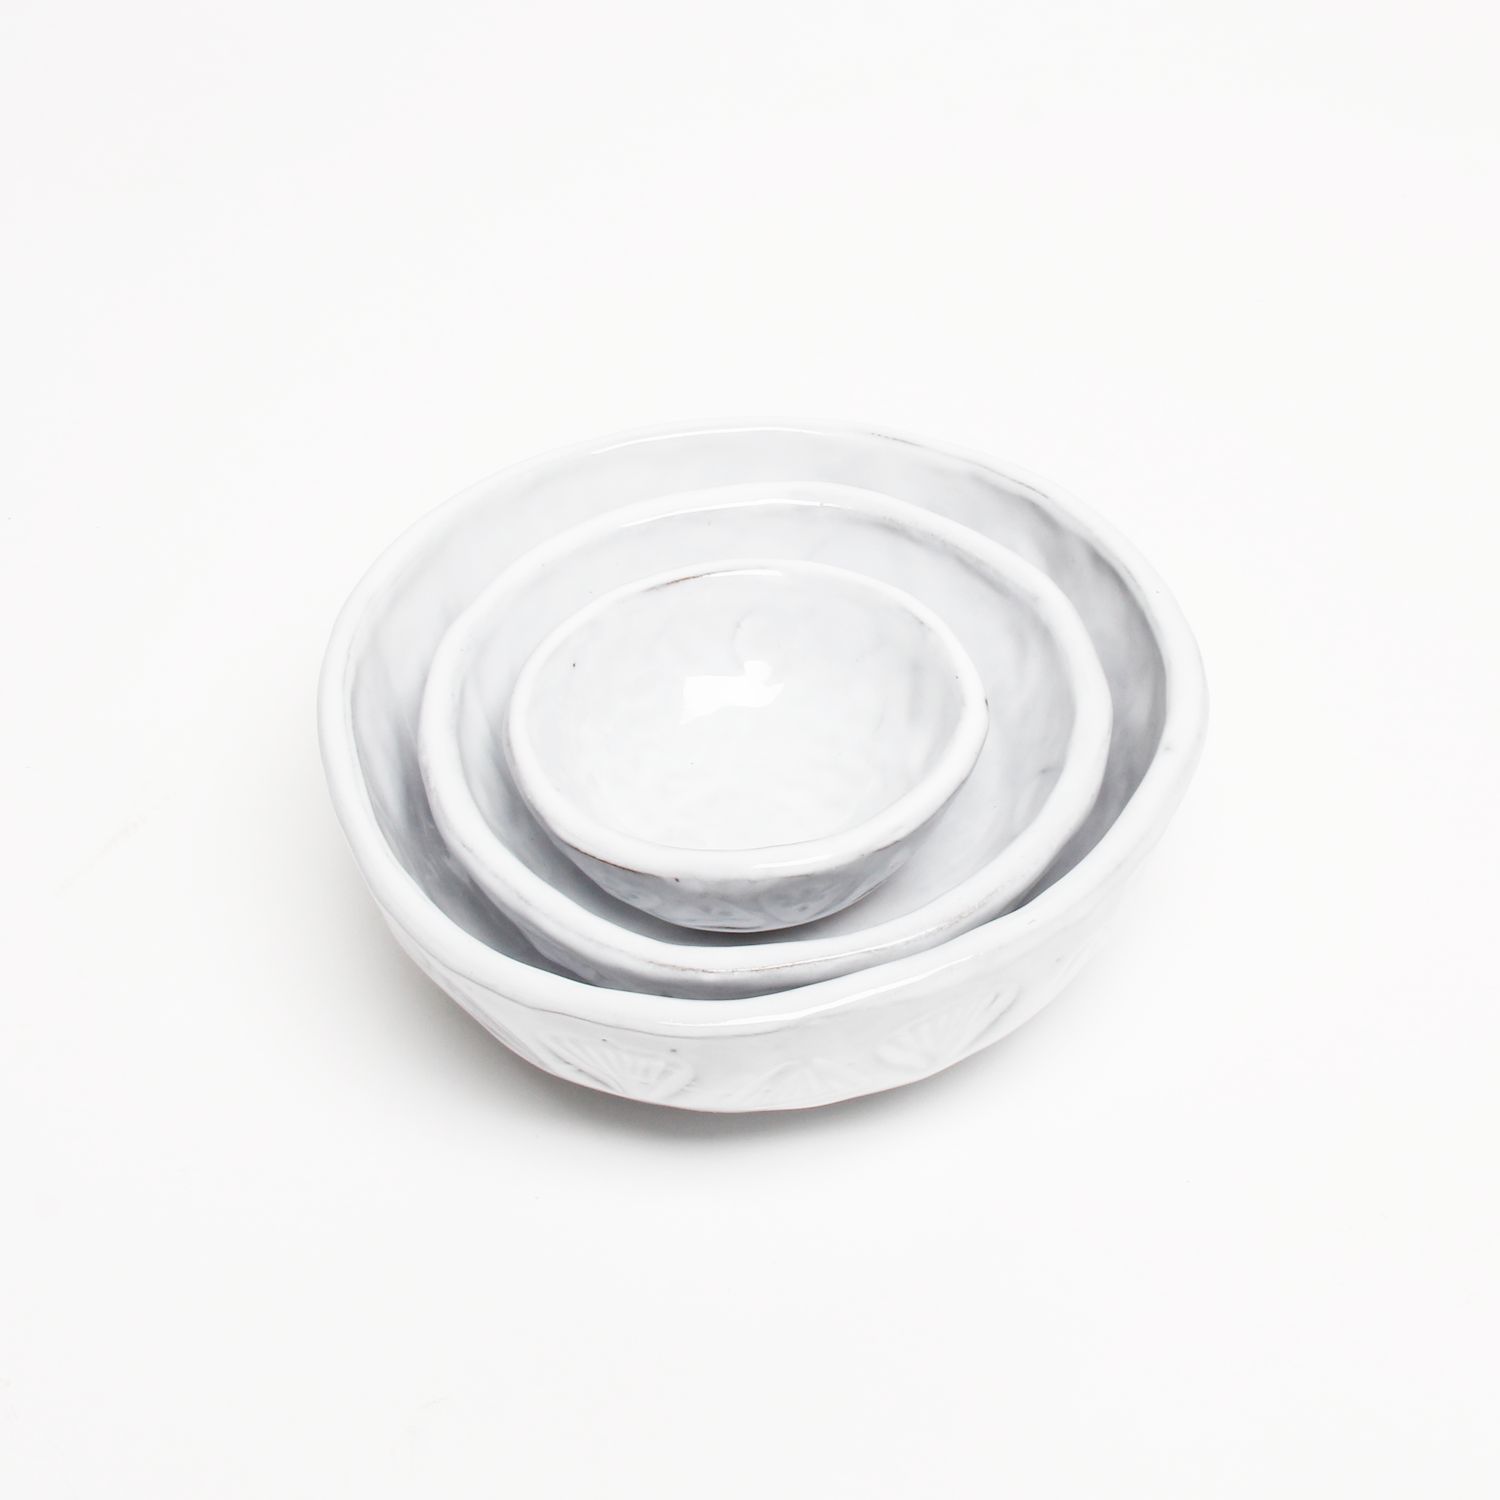 Jacquie Blondin: Nesting Bowl with Carved X Design (Set of 3) Product Image 3 of 4